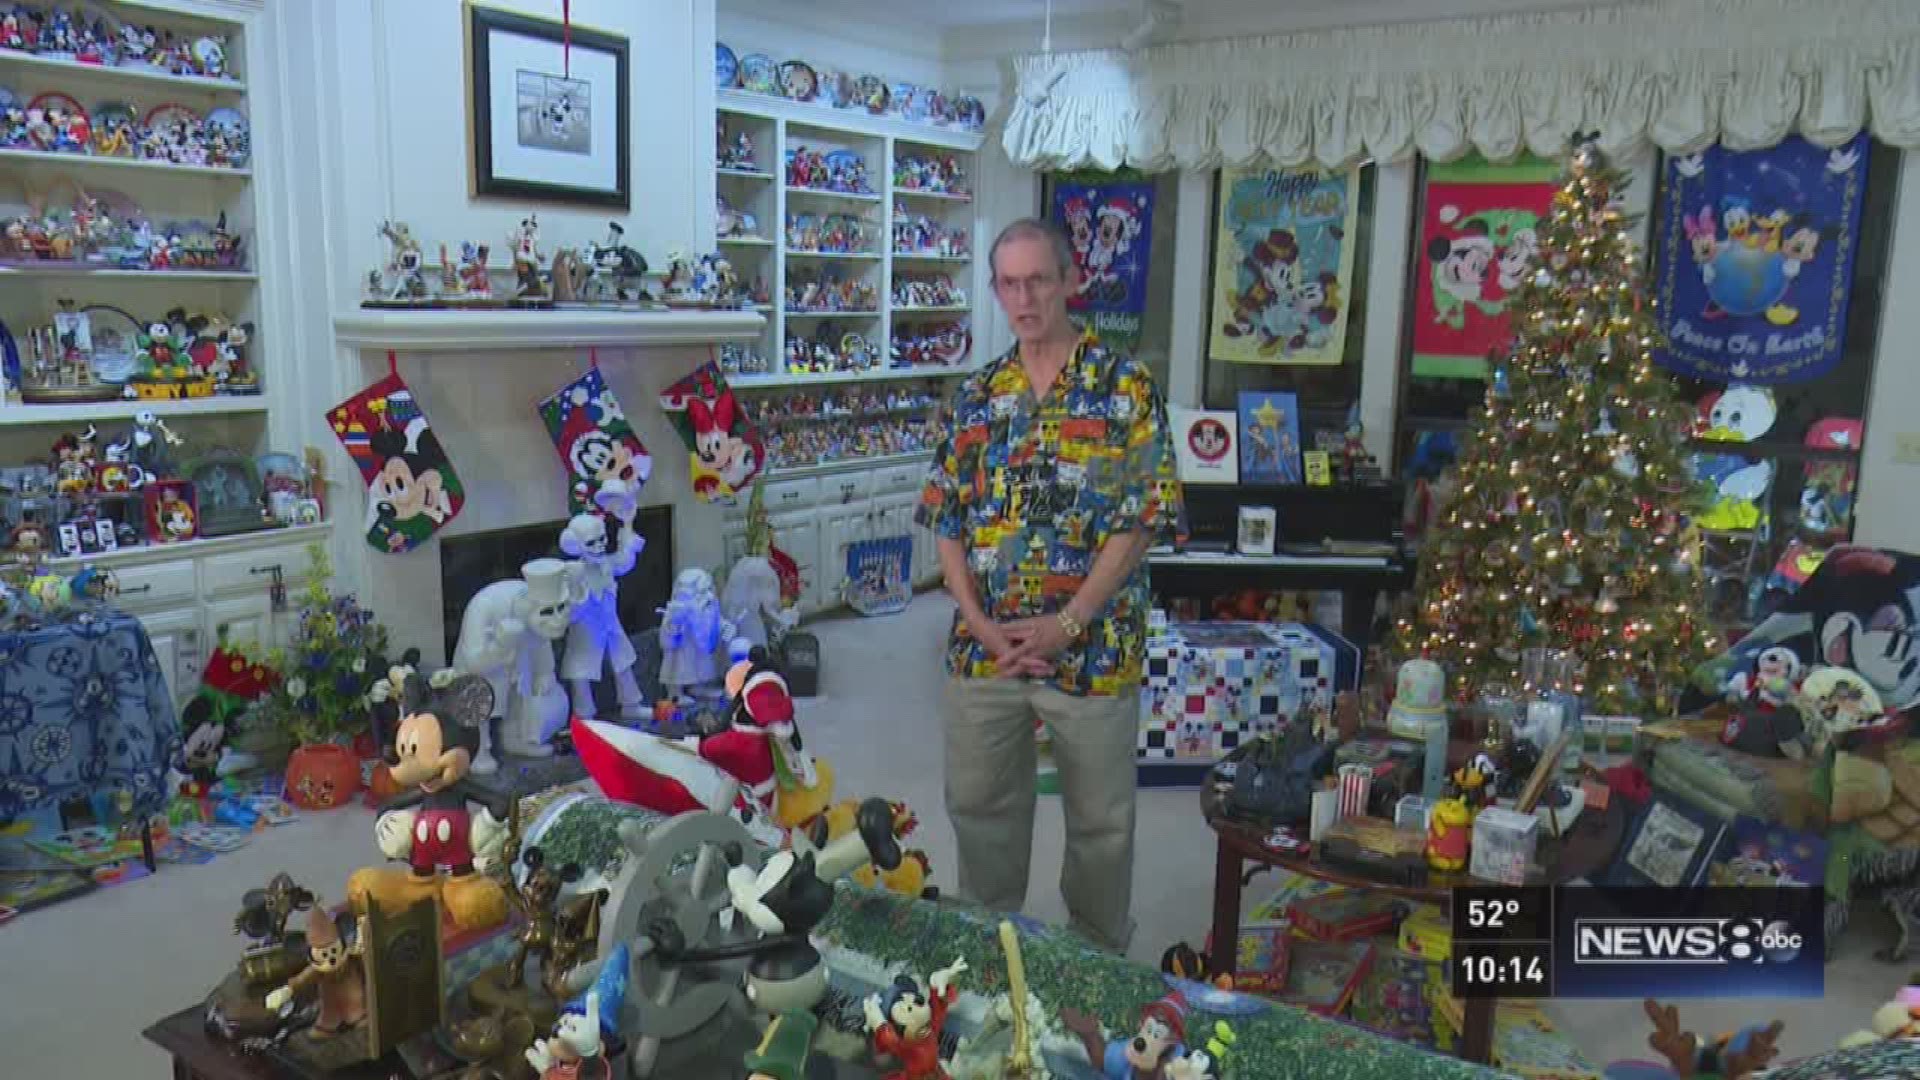 Lesson from Plano man's 9,000-item Disney collection? Live your